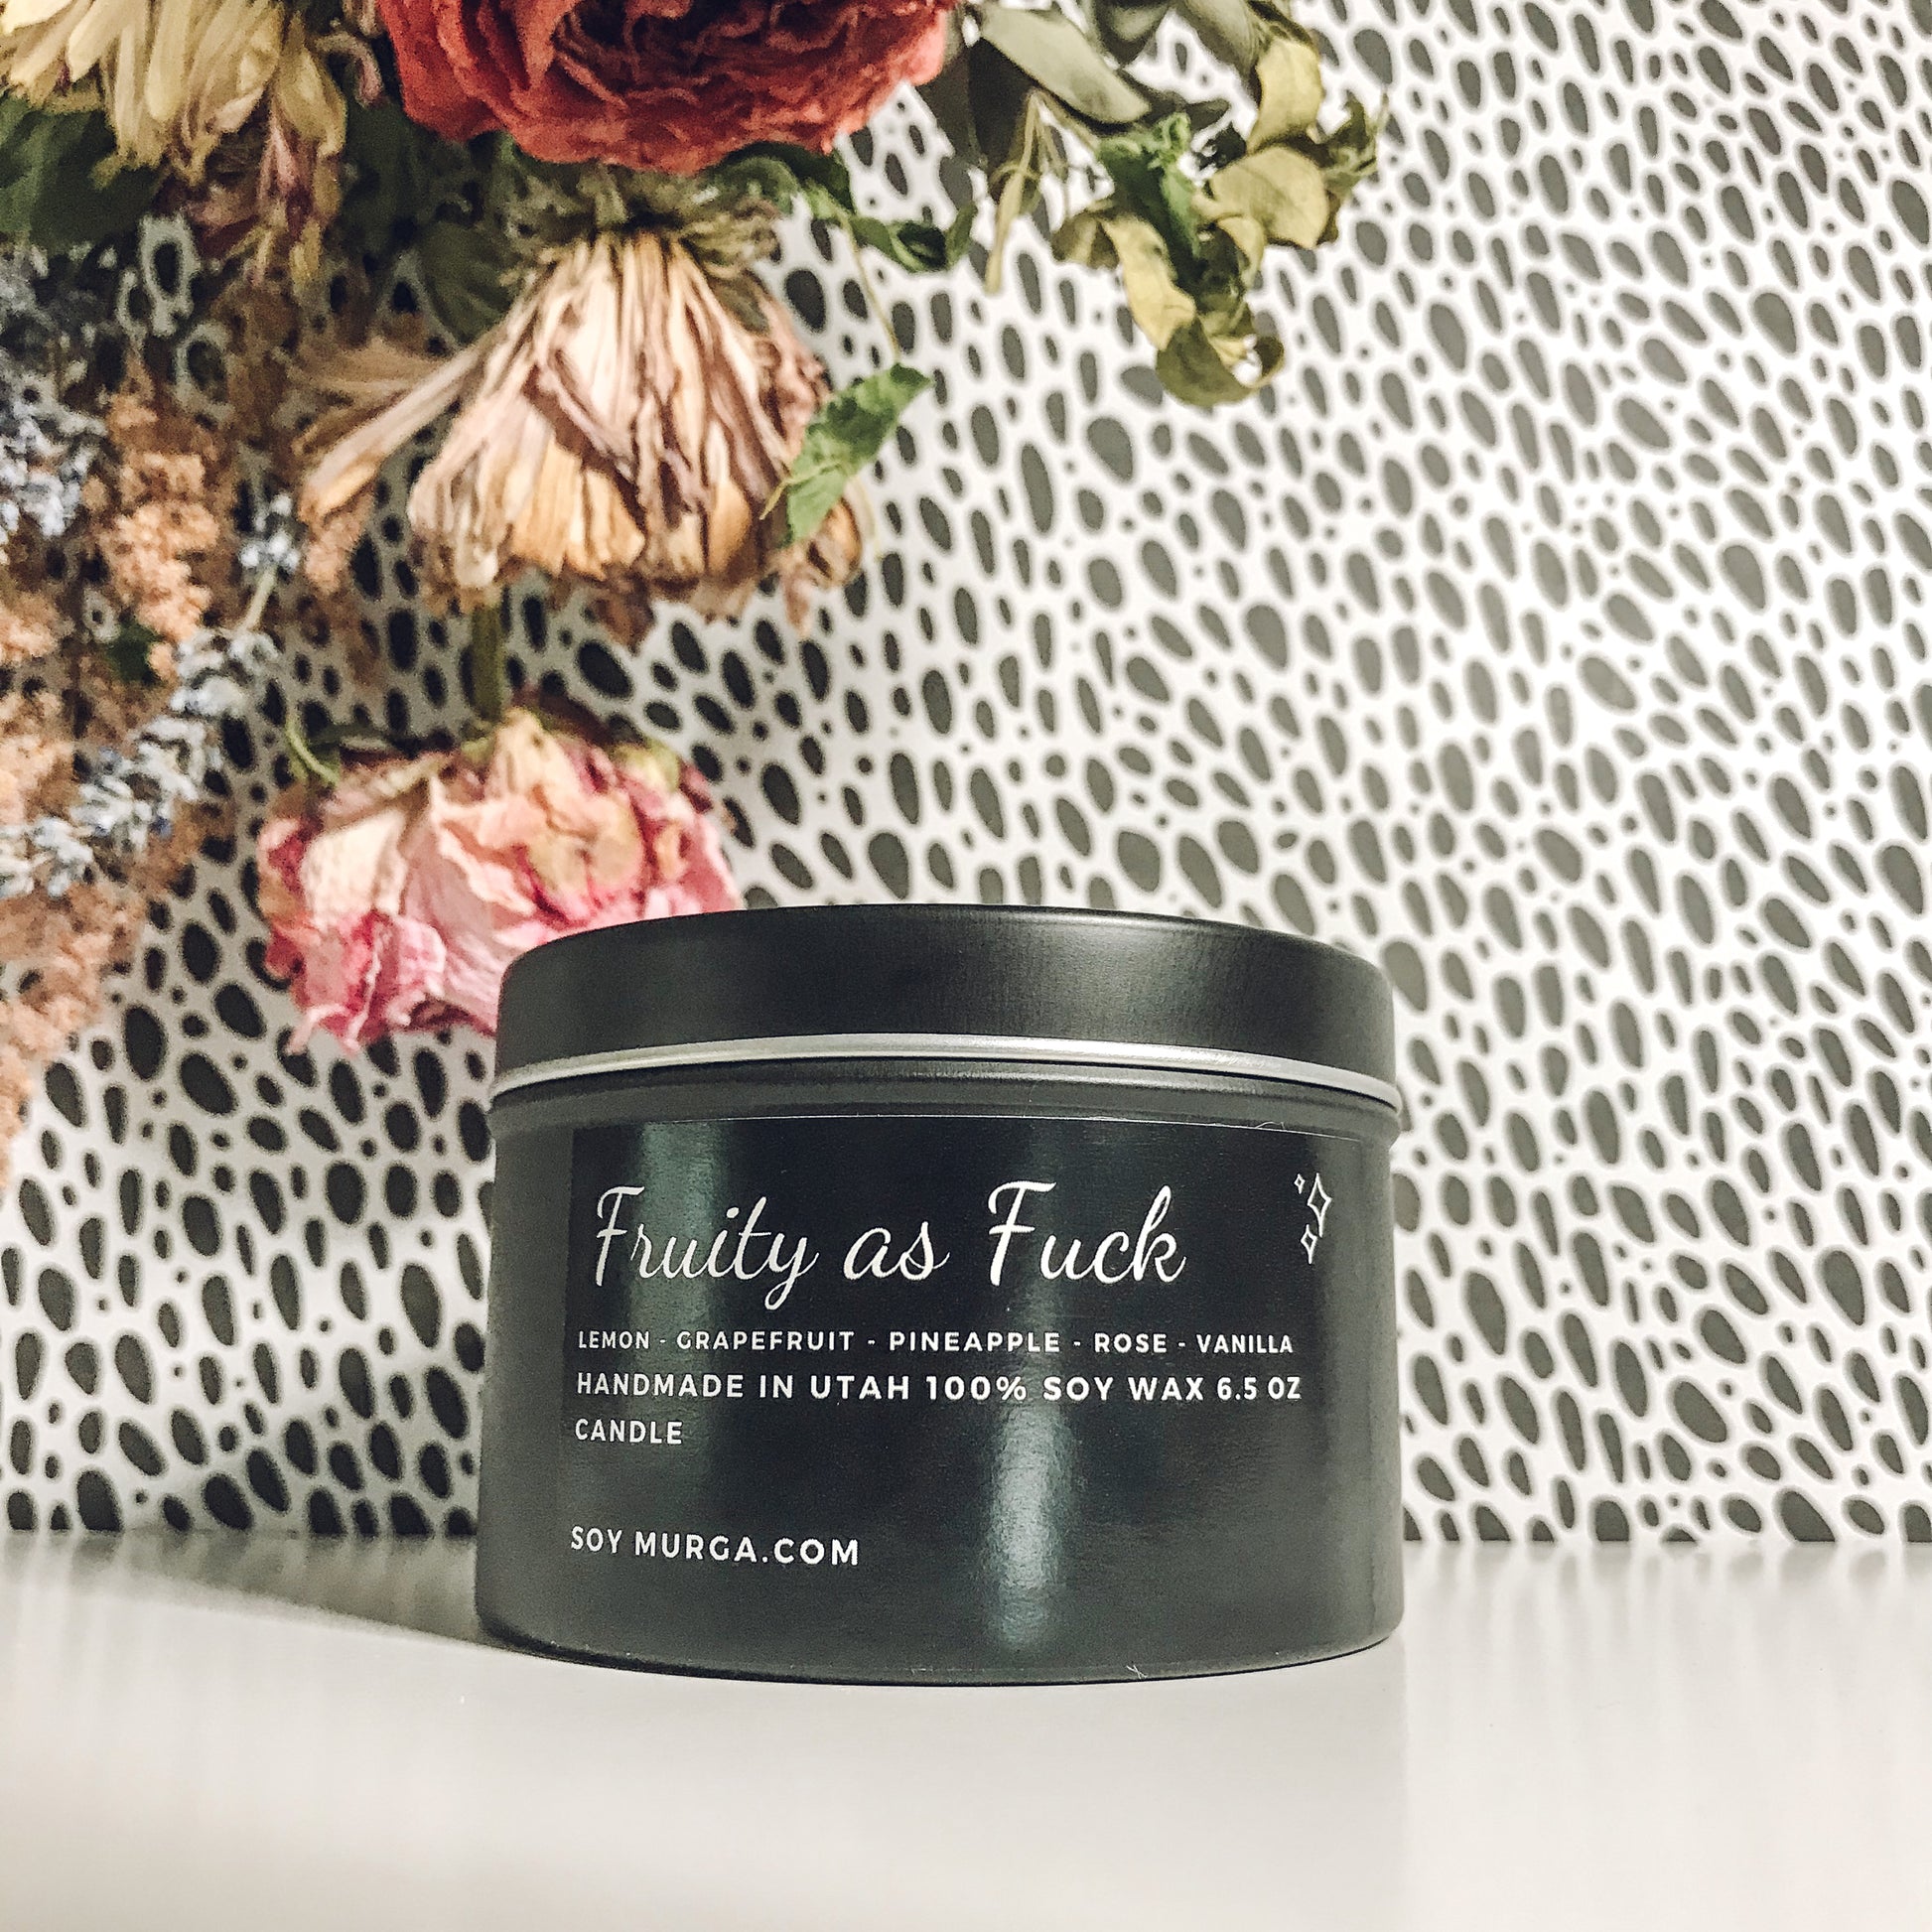 Fruity As Fuck is a bubbly bright and loud fruity concoction. This blend features Lemon, Grapefruit, Pineapple, Rose and Vanilla